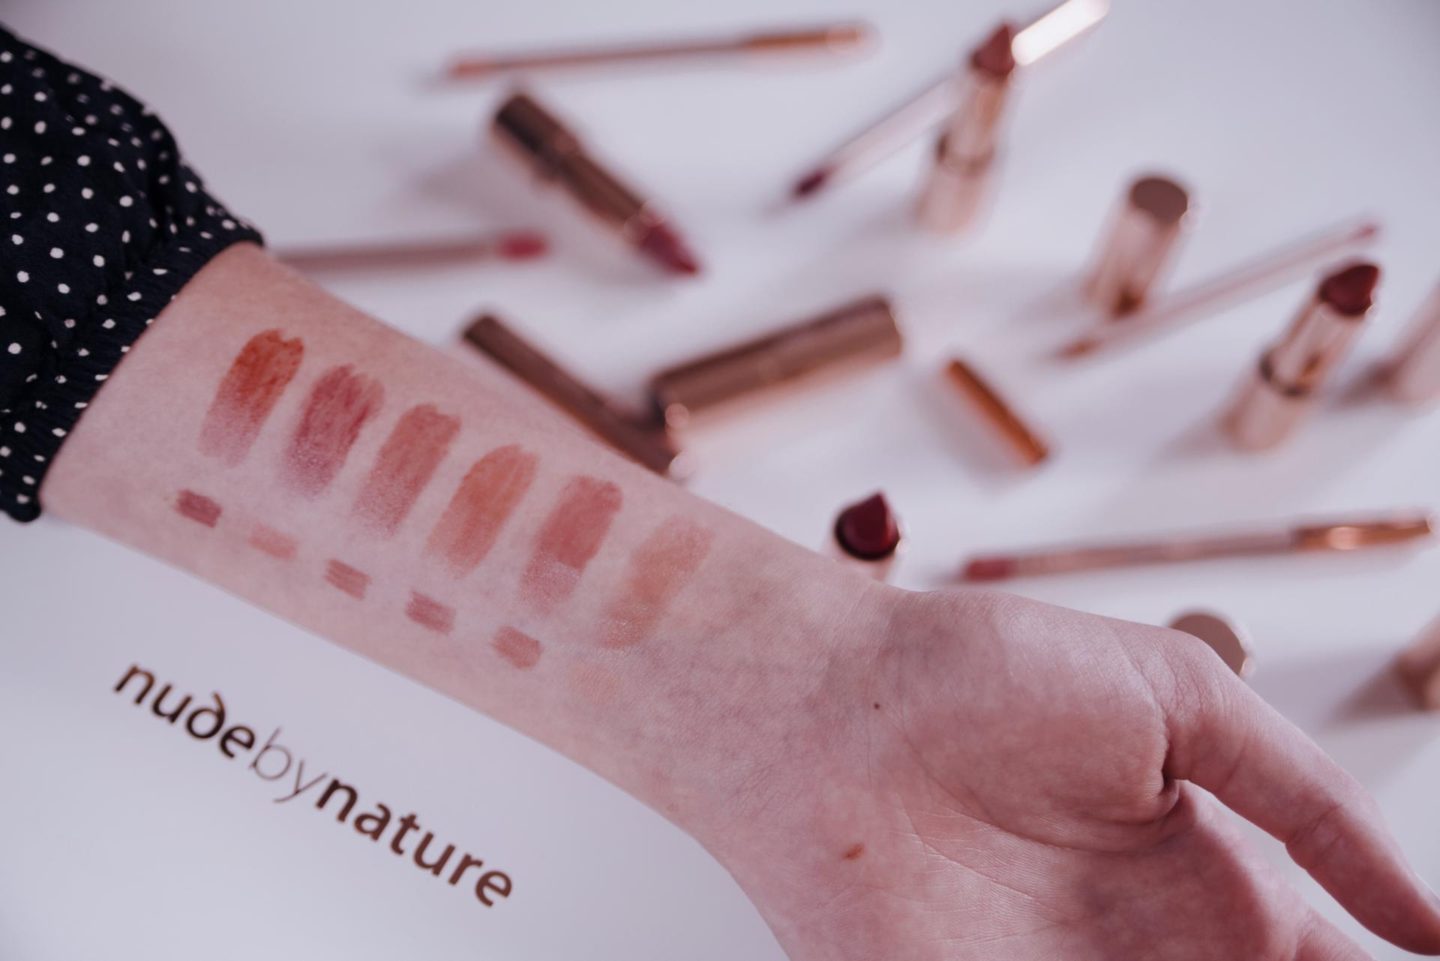 New Lip Collection From Nude By Nature - Amanda Grabowski-2962